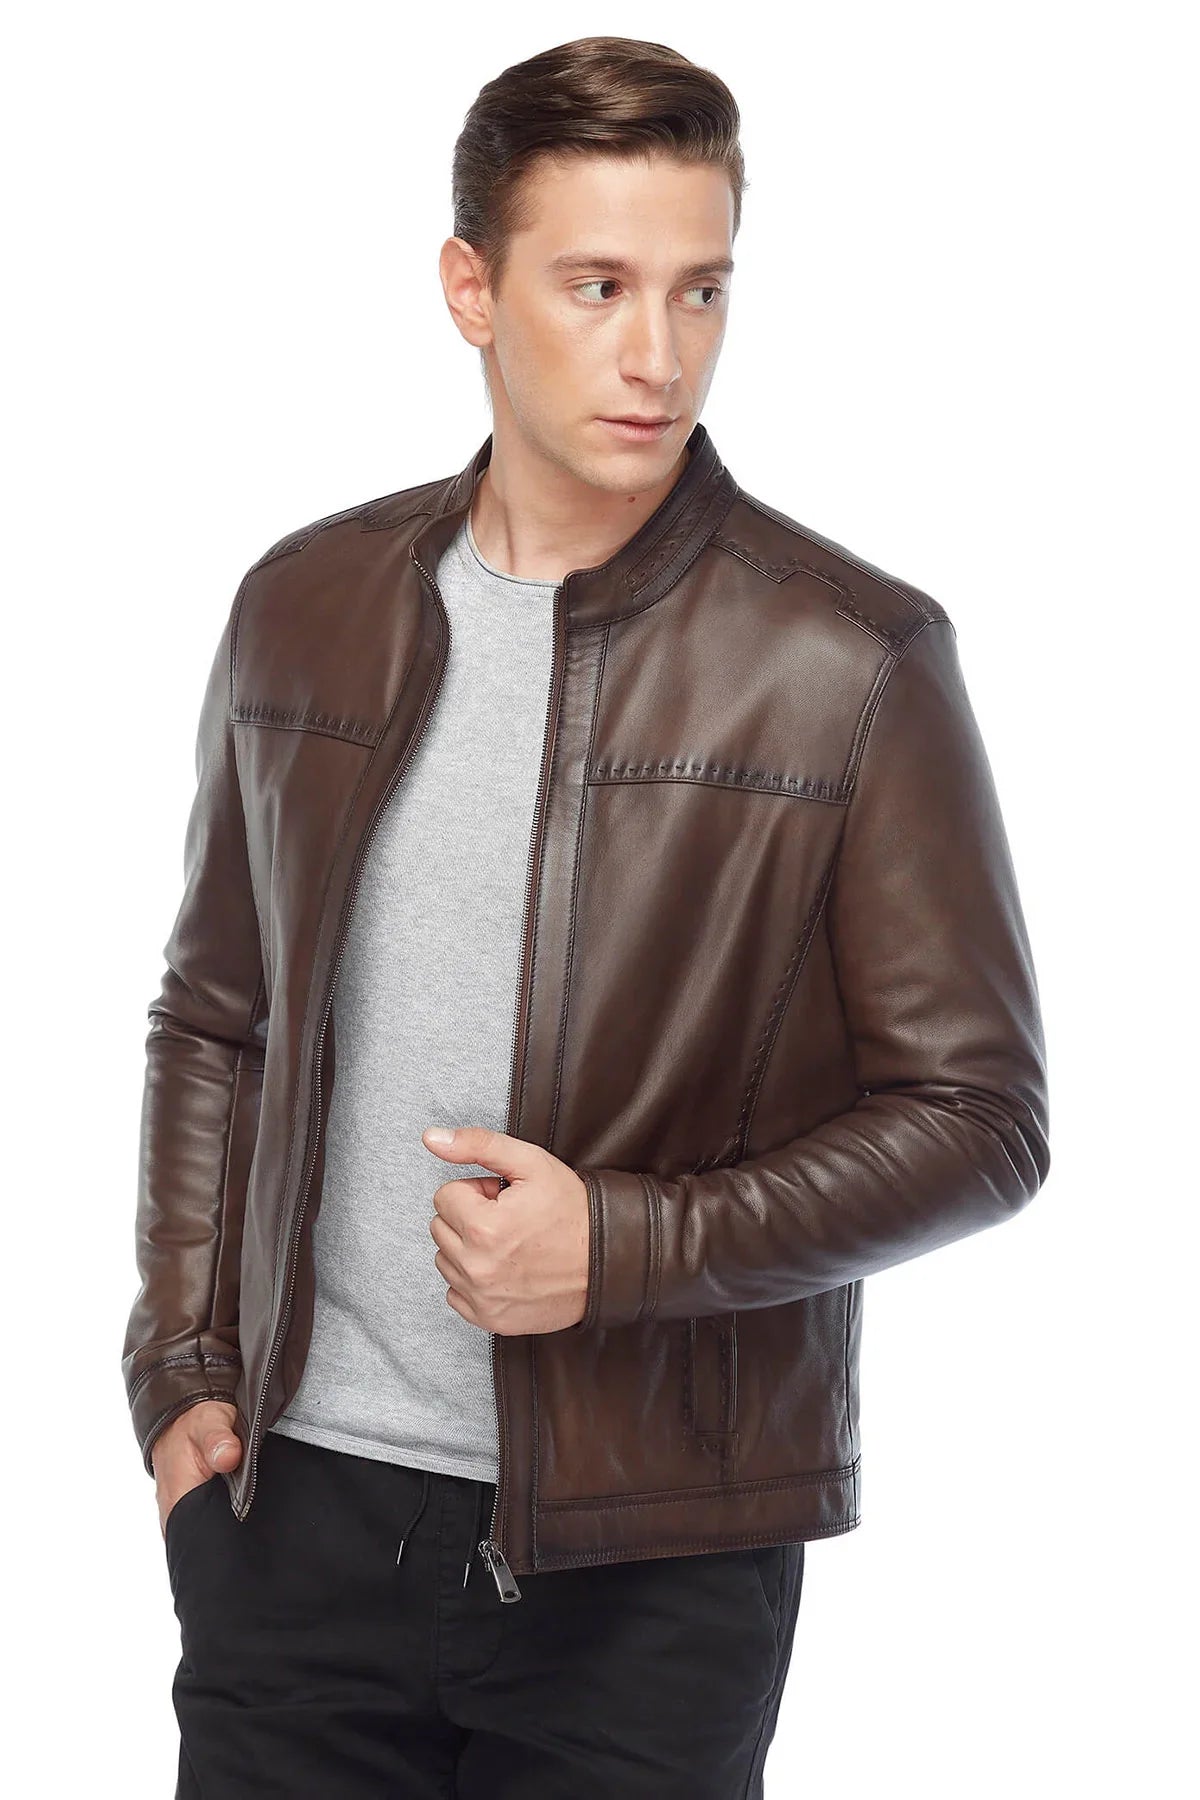 Sport Stitched Classic Real Leather Brown Jacket - LJ